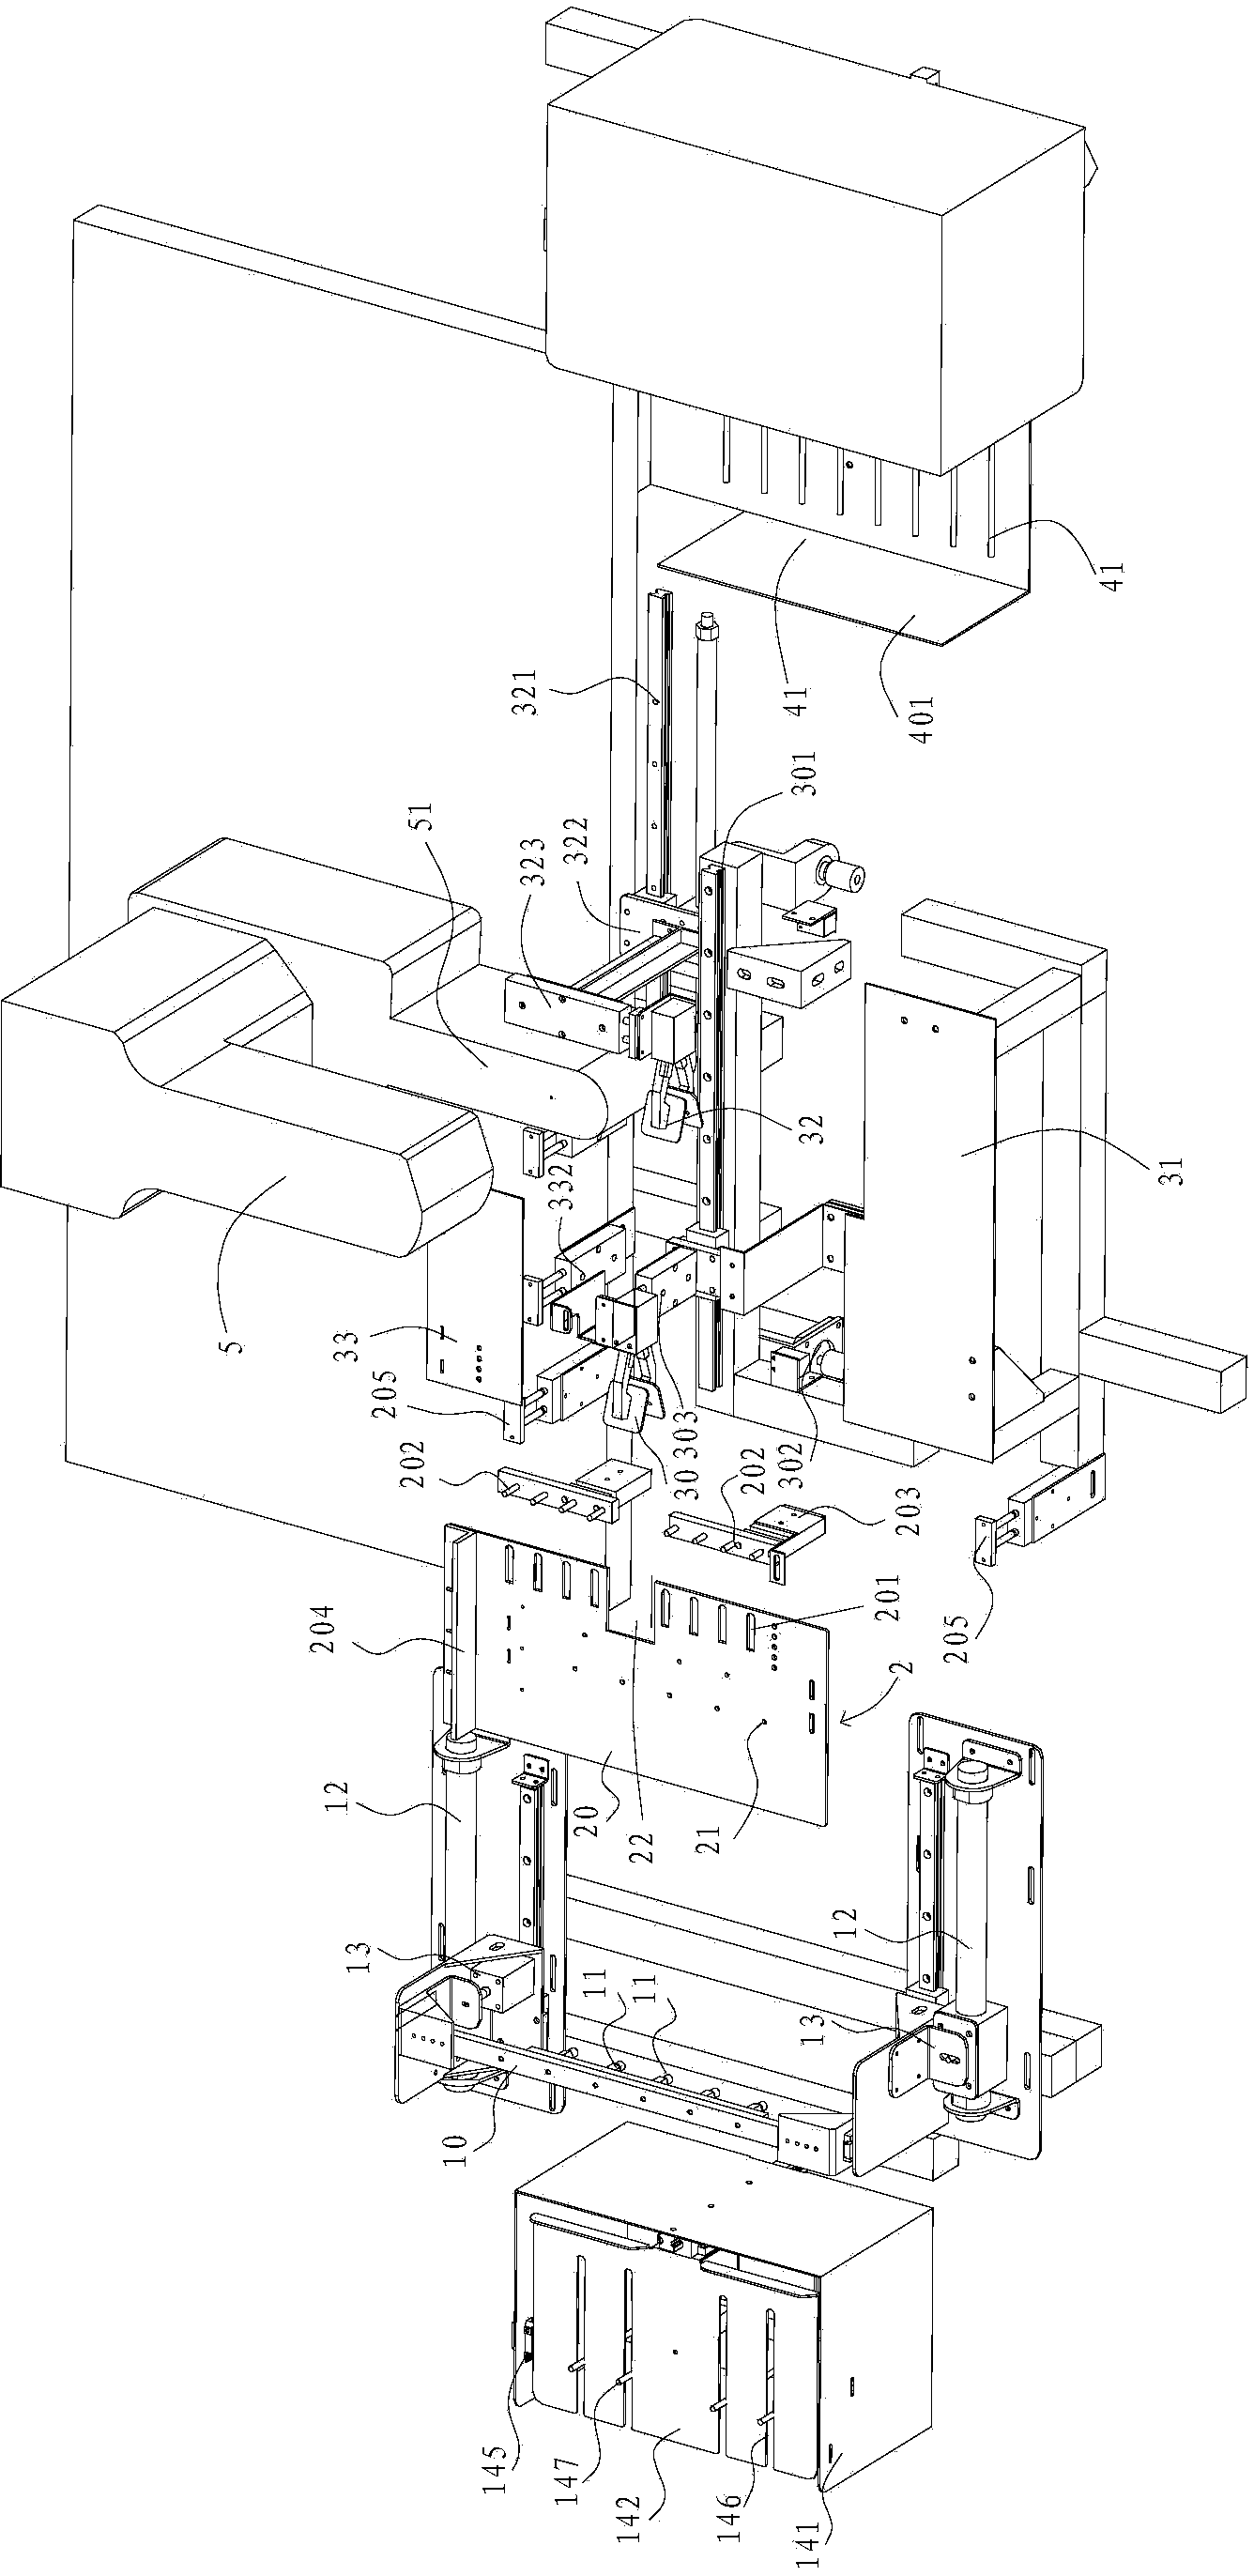 Sewing feeding and discharging assisting device